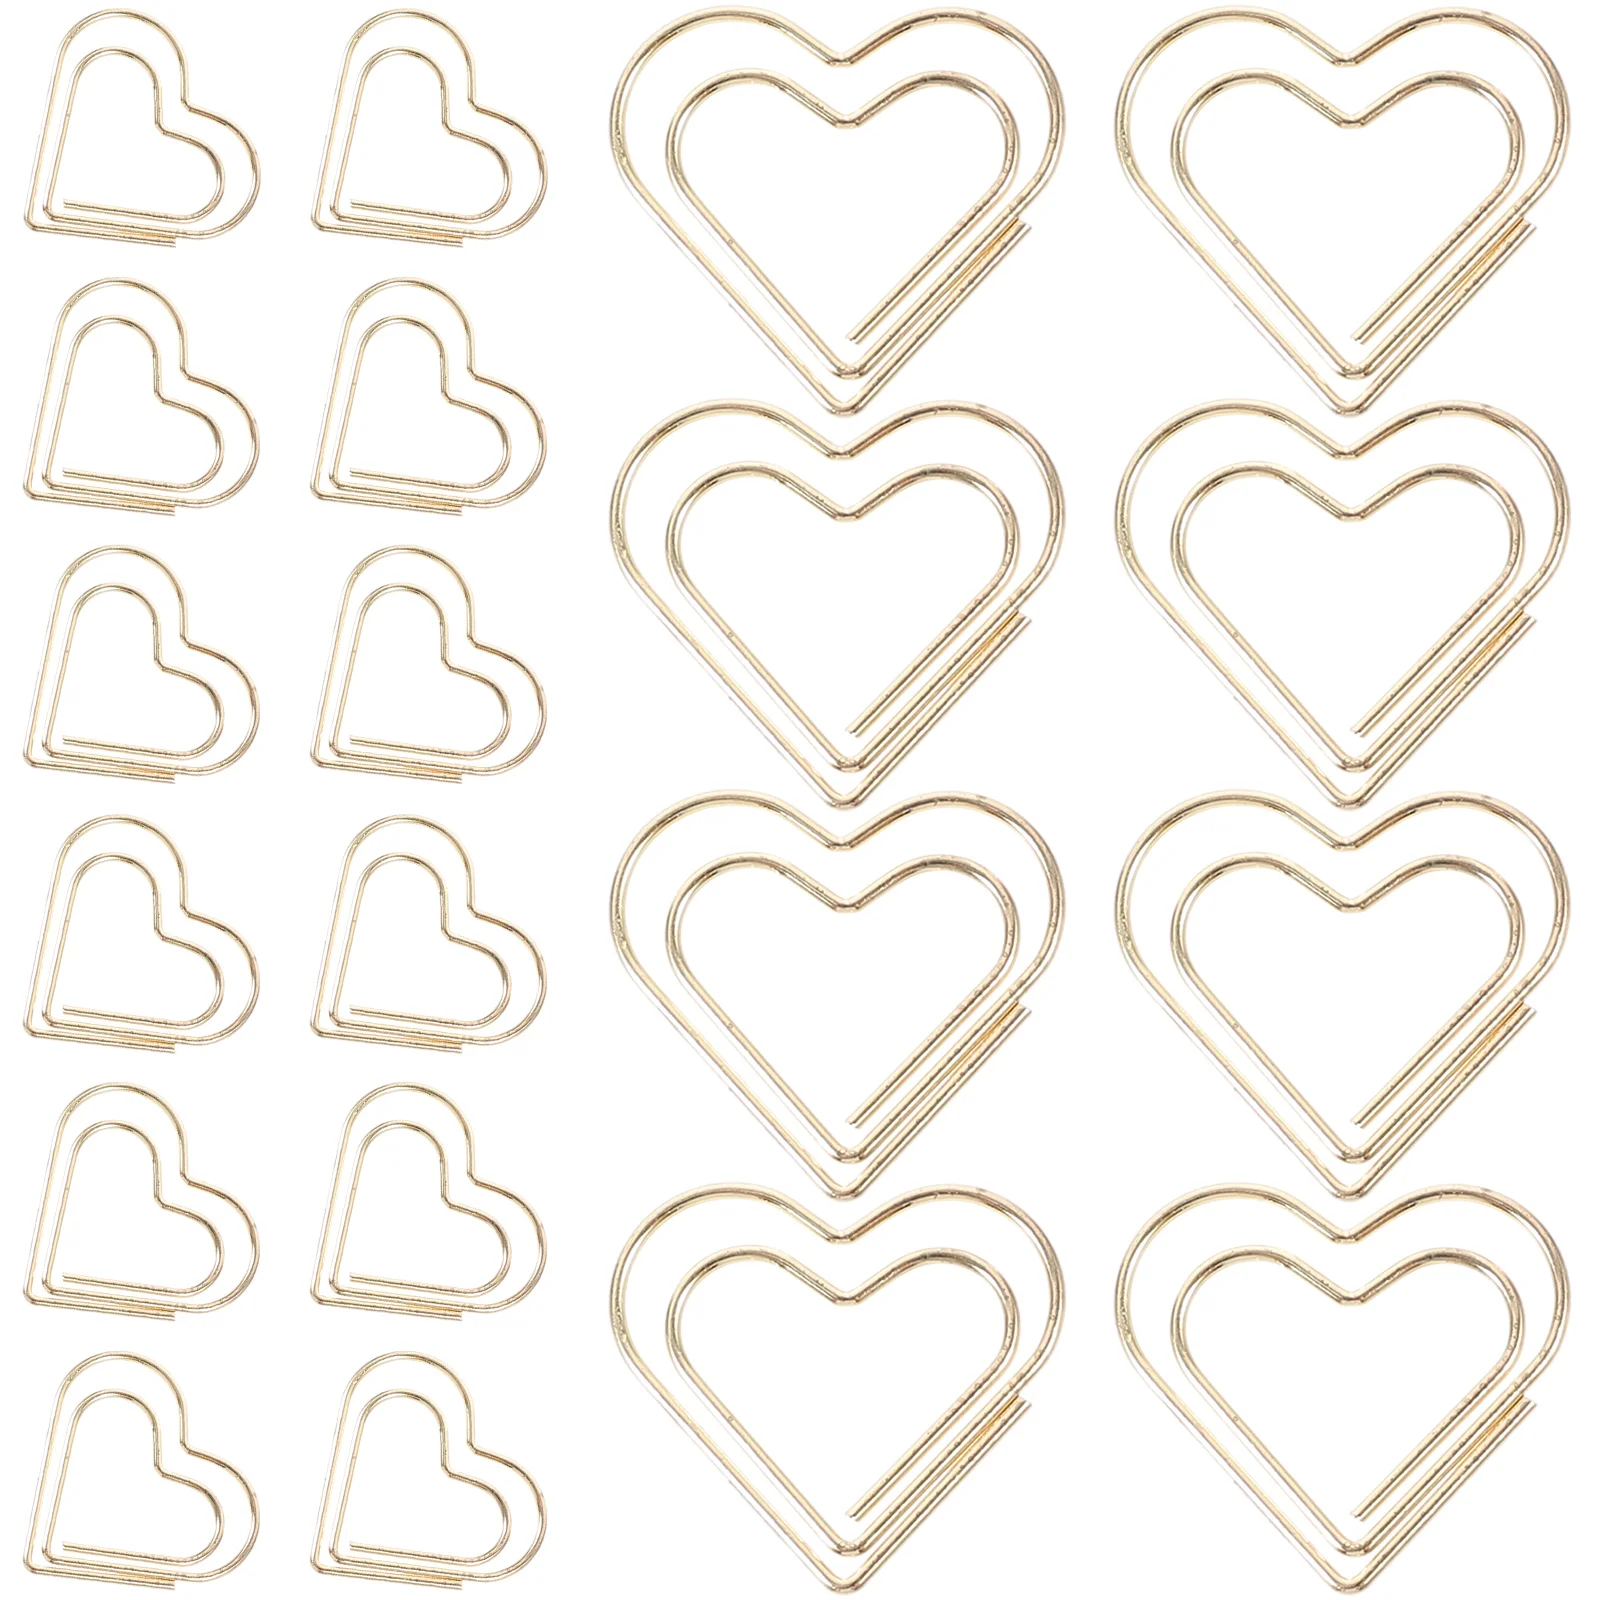 

50 Pcs Heart-shaped Bookmarks Delicate Paper Clips Tiny Books Bookmarked Decorative Paperclips Metal for File